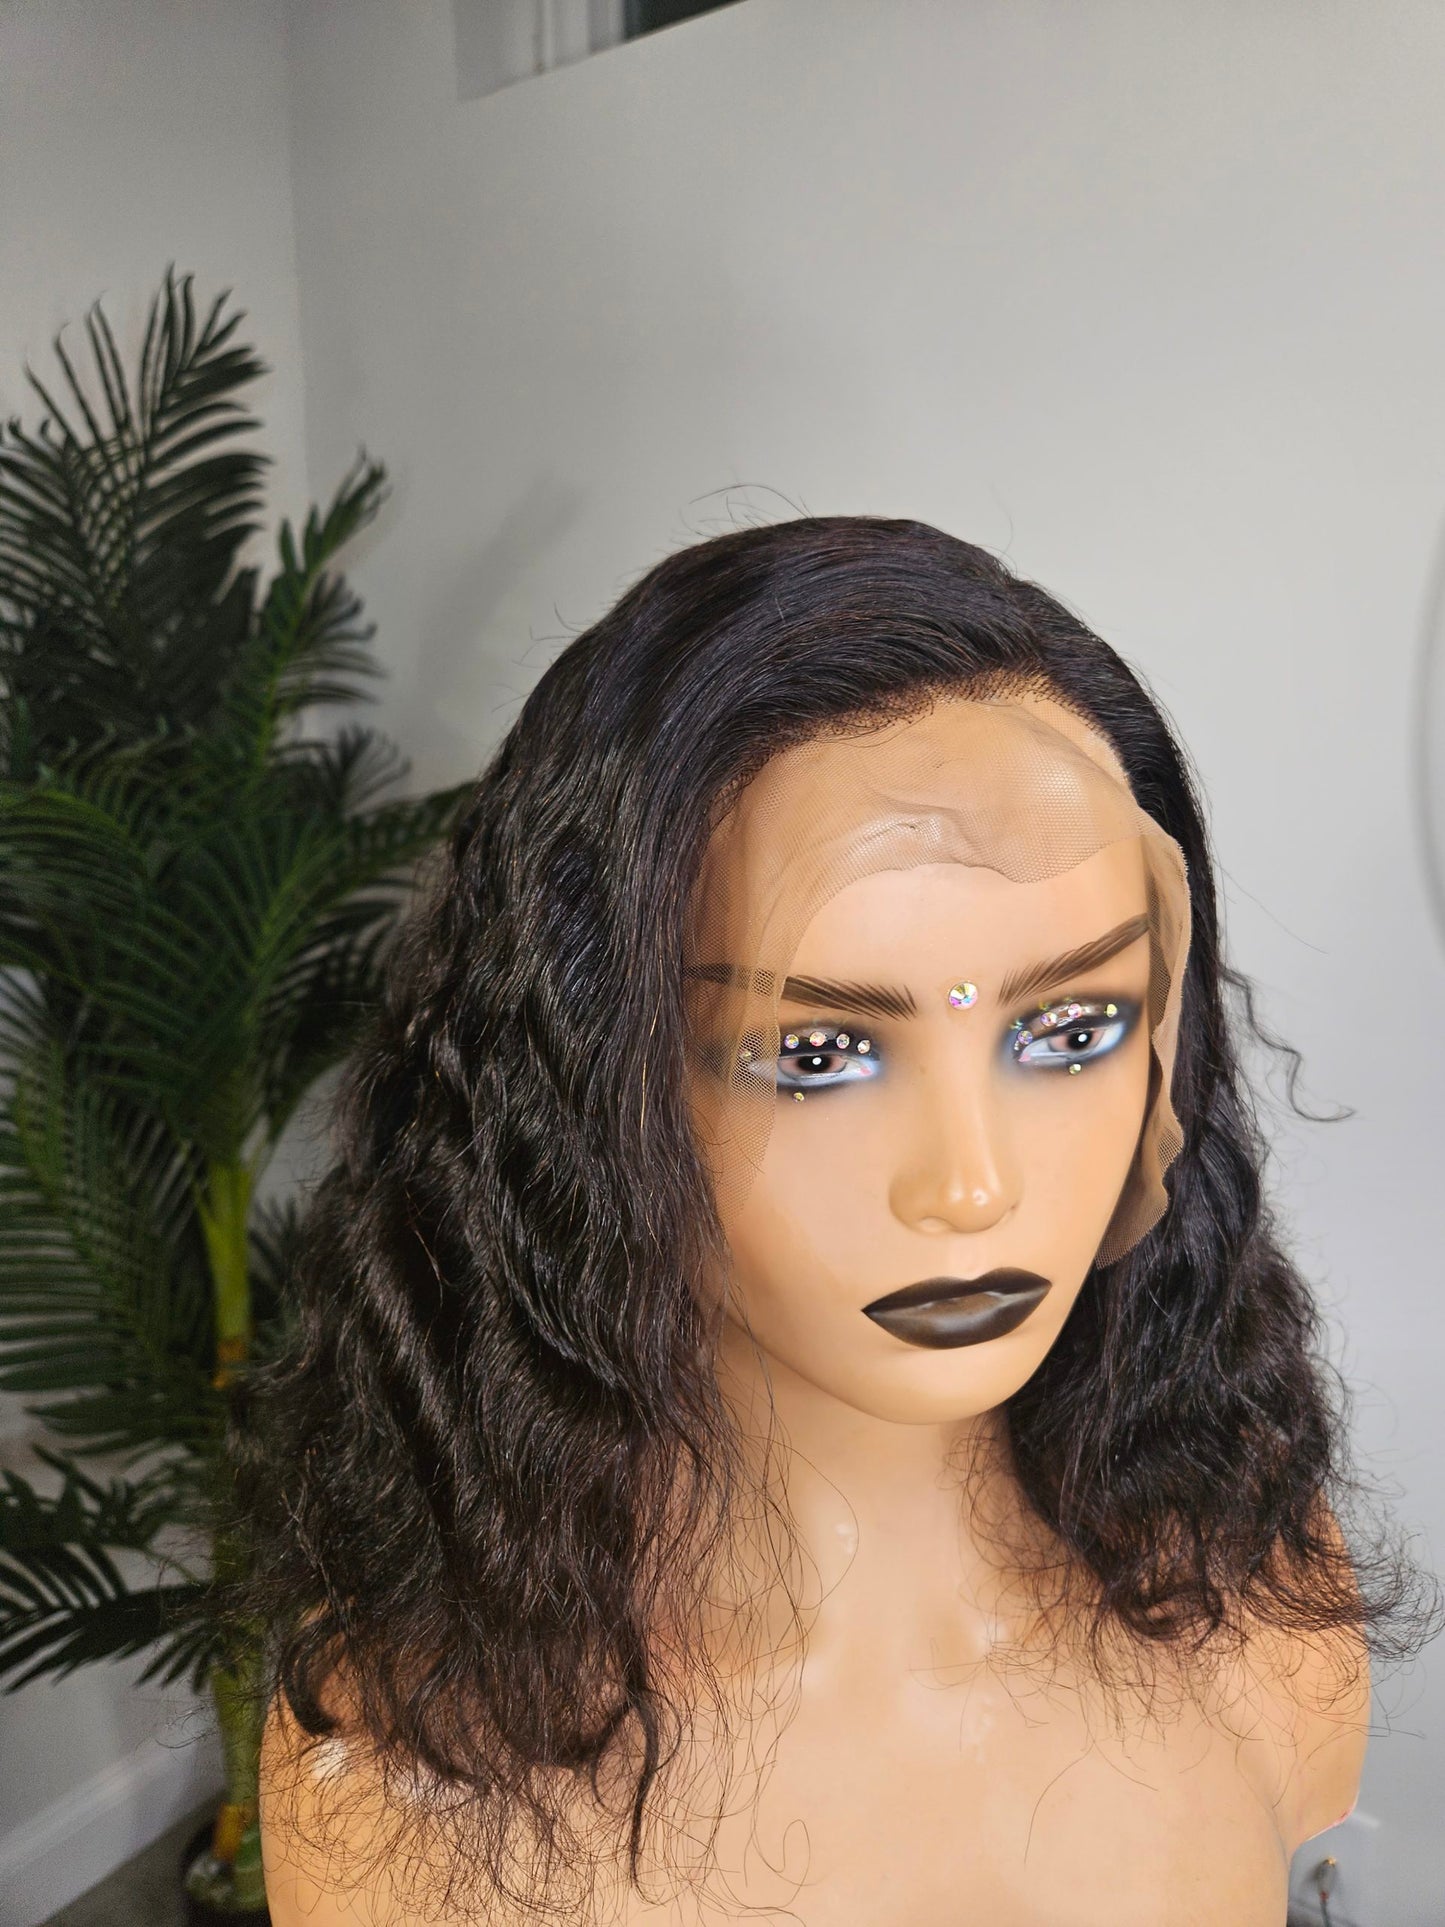 Water Wave Frontal Wig